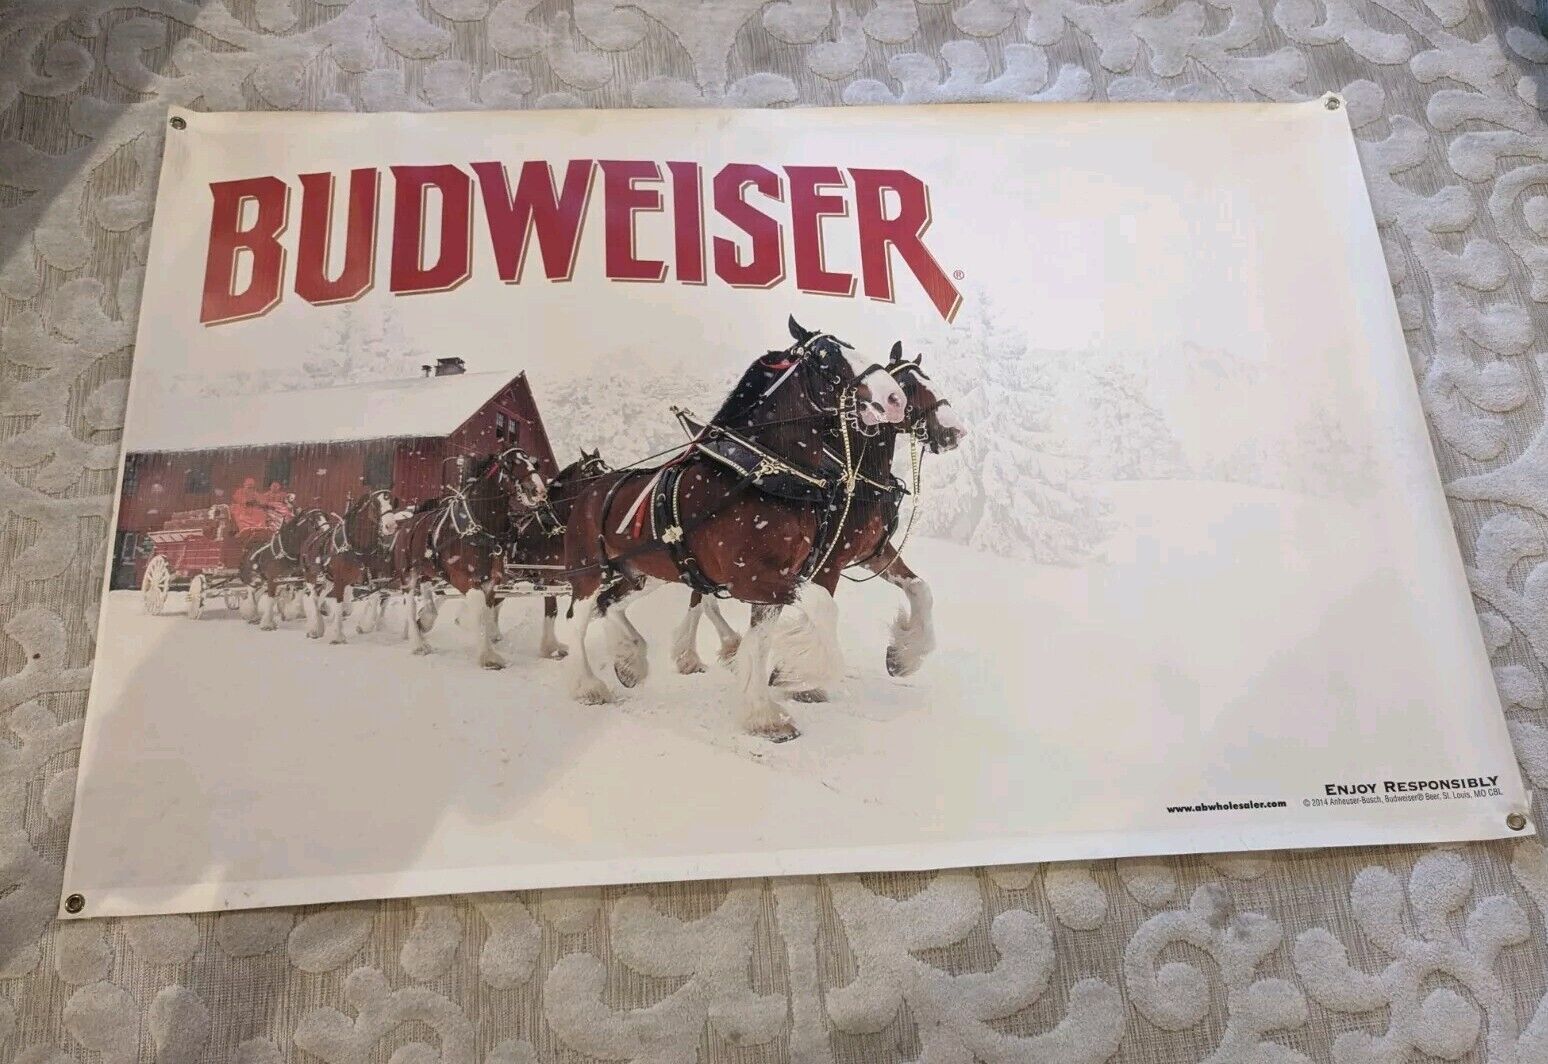 Large Budweiser Vinyl Banner. Clydesdale horses, Approx 5x3. Rare Item 